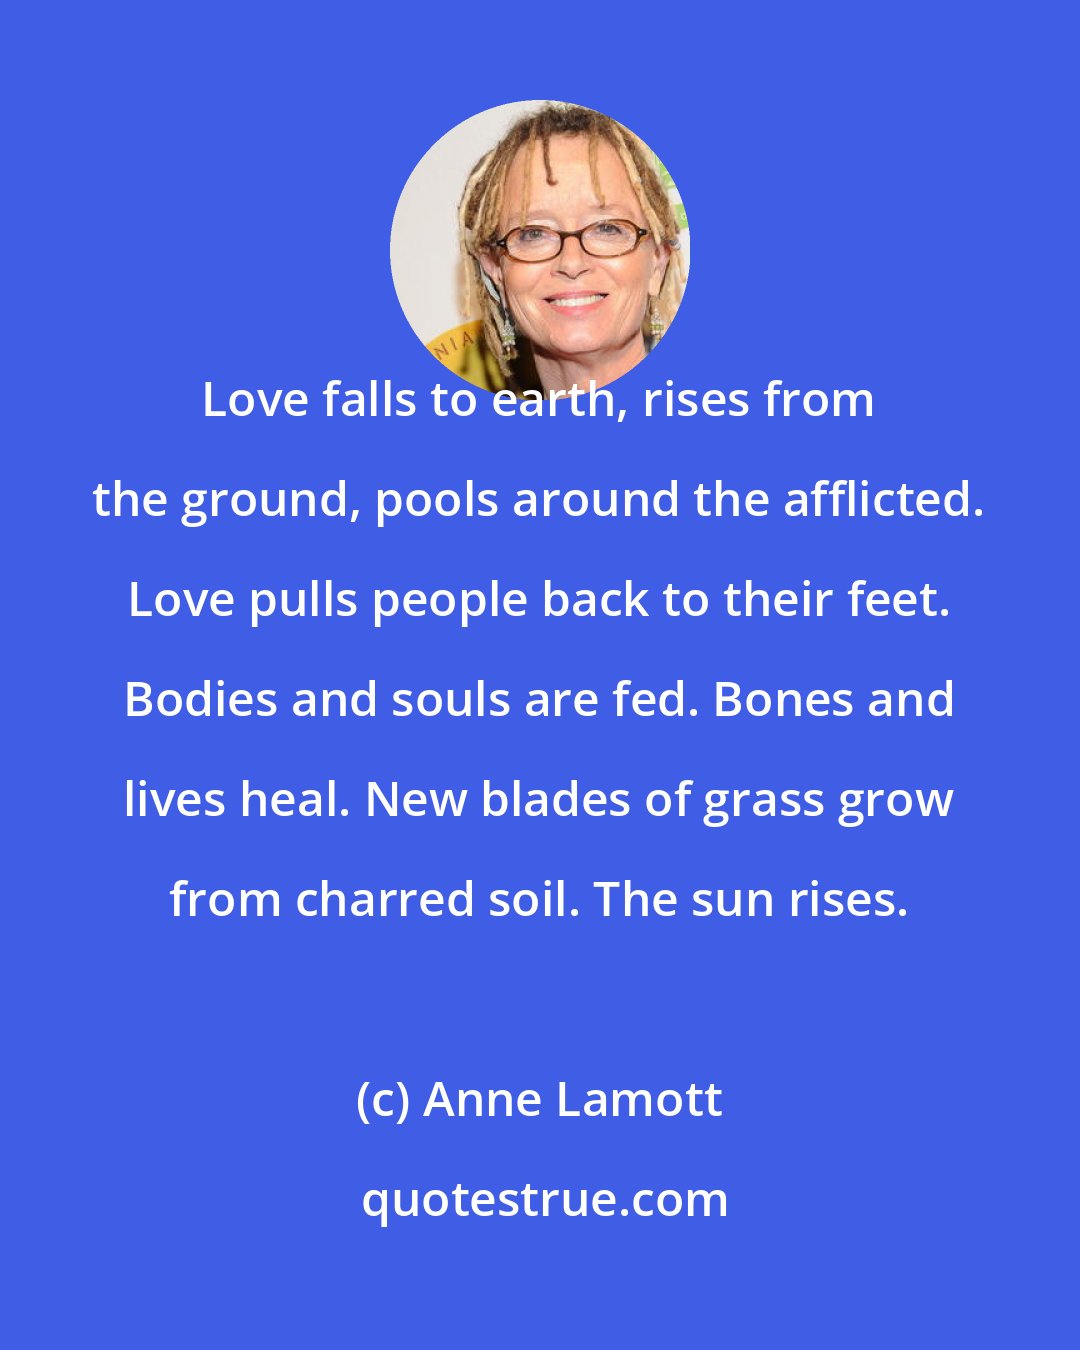 Anne Lamott: Love falls to earth, rises from the ground, pools around the afflicted. Love pulls people back to their feet. Bodies and souls are fed. Bones and lives heal. New blades of grass grow from charred soil. The sun rises.